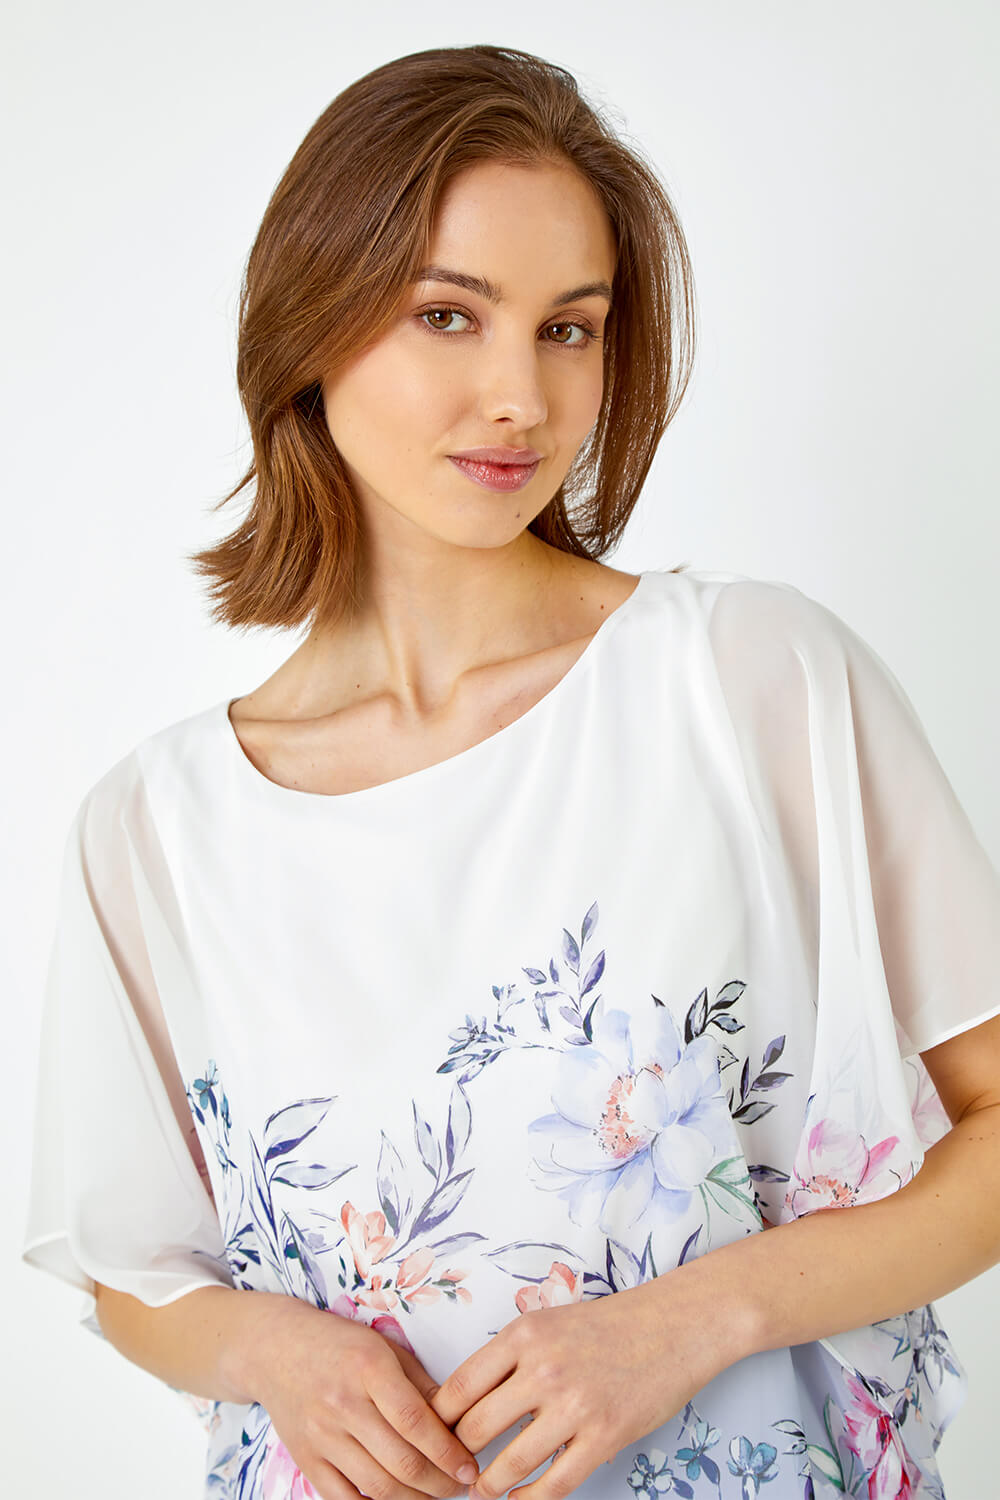 Lavender Floral Print Chiffon Overlay Top, Image 4 of 5